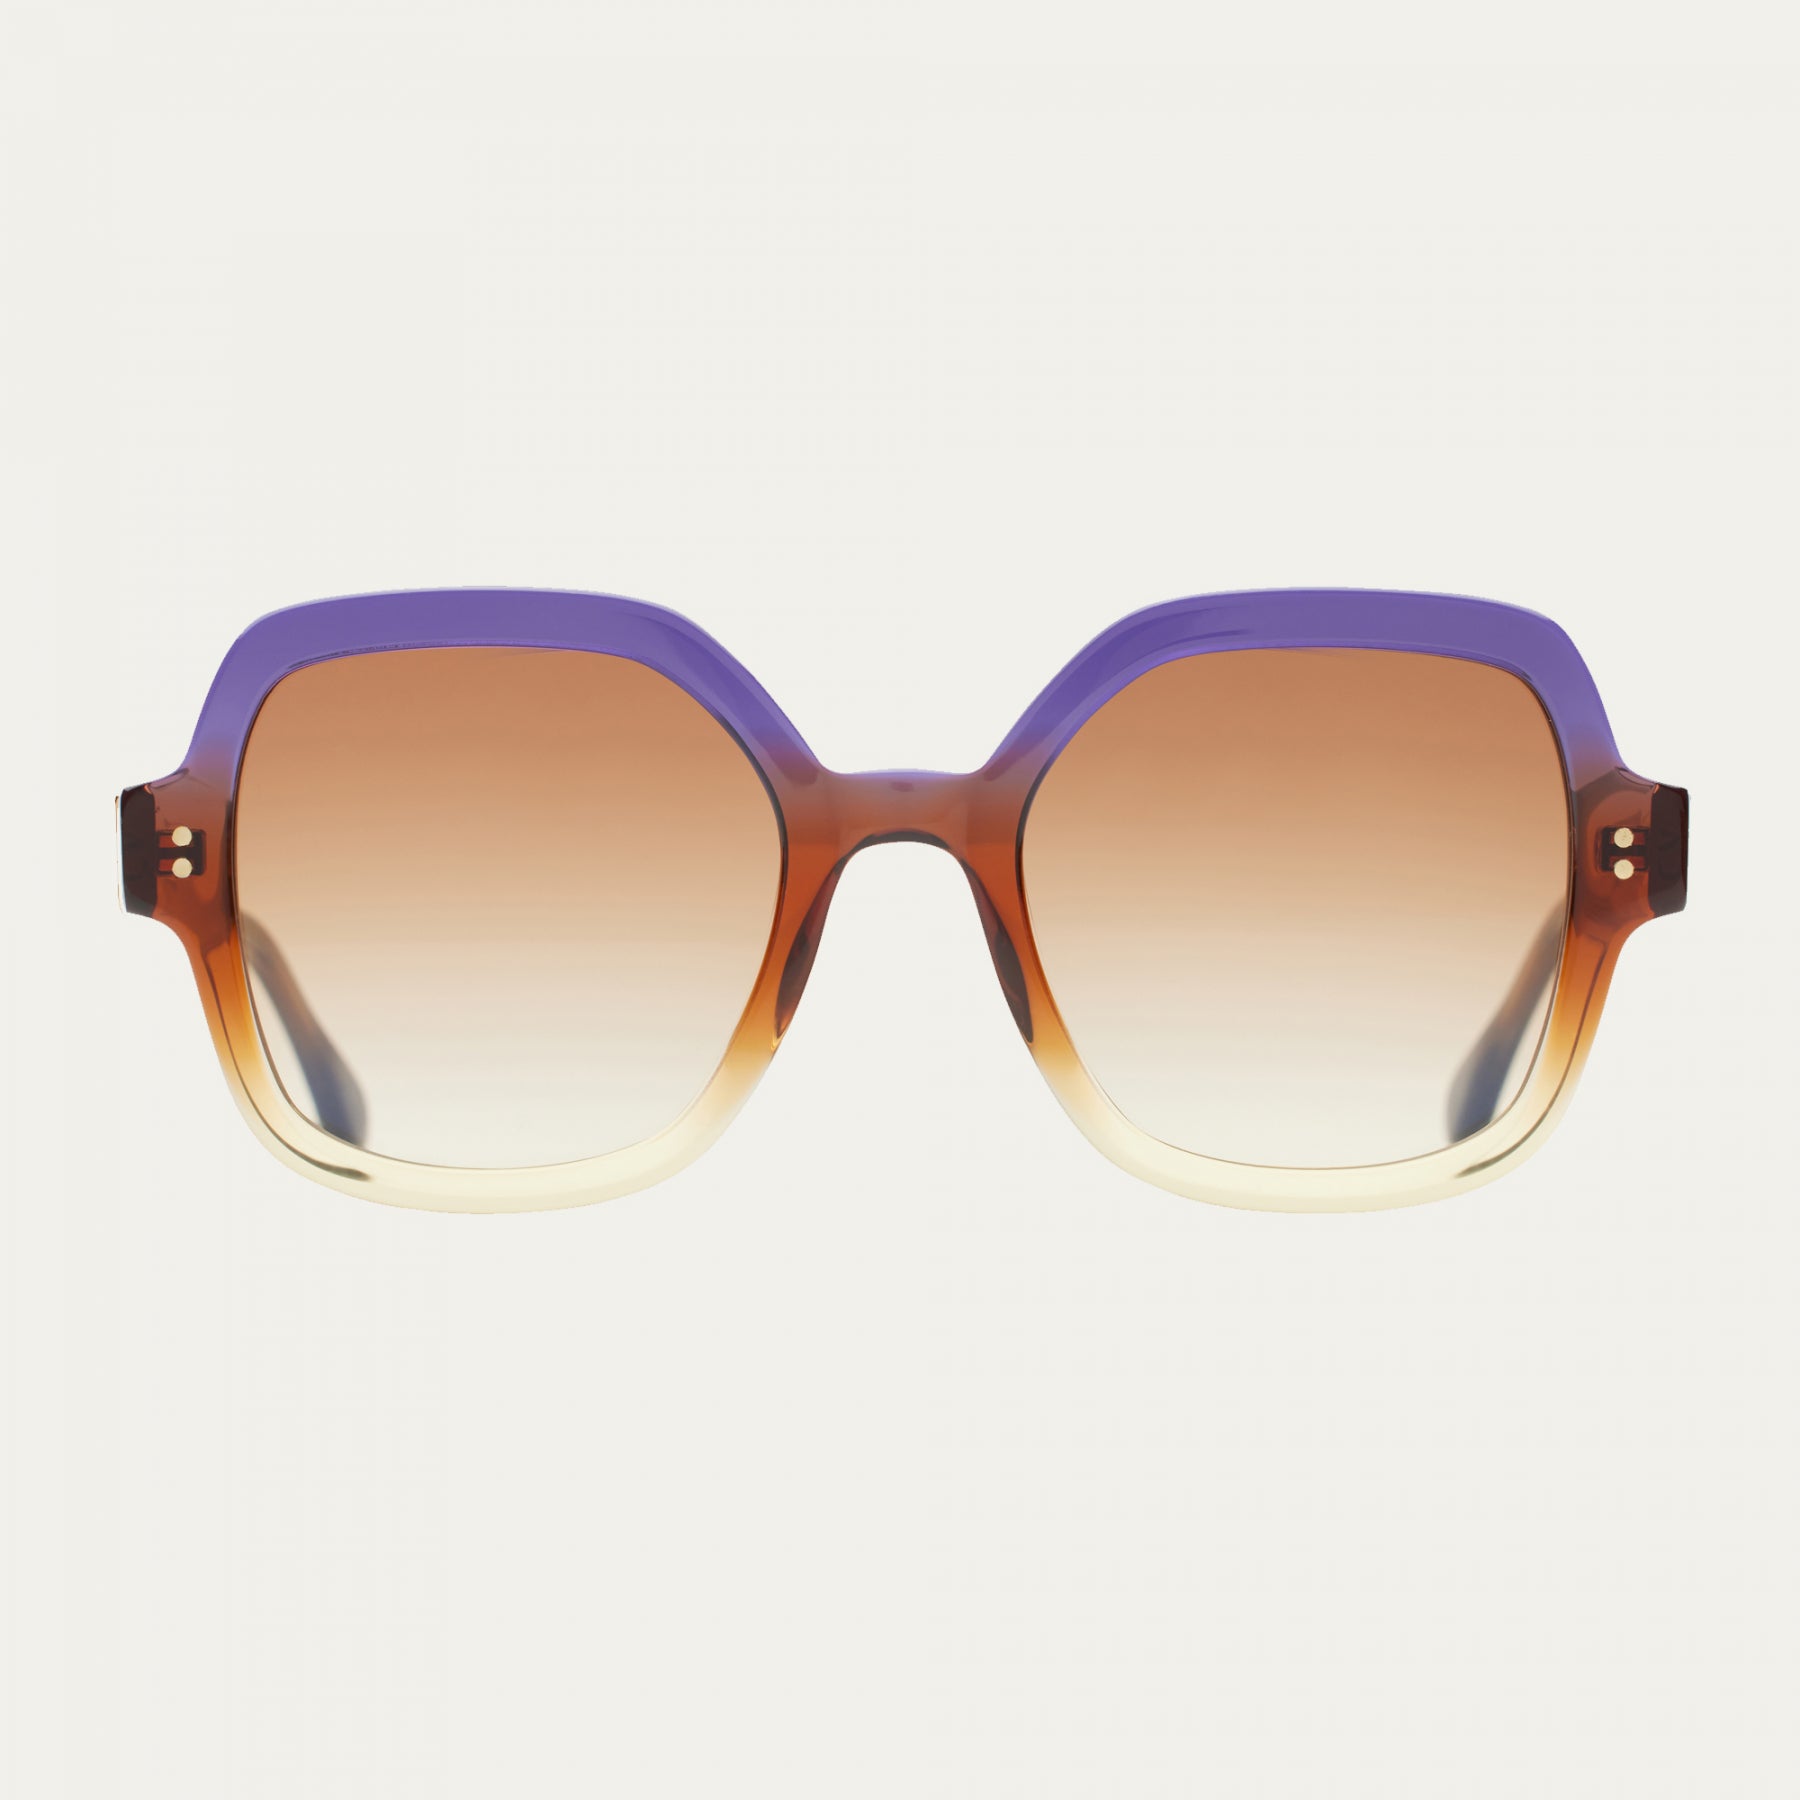 Sunglasses Lava Java inspired by Indonesian adventures